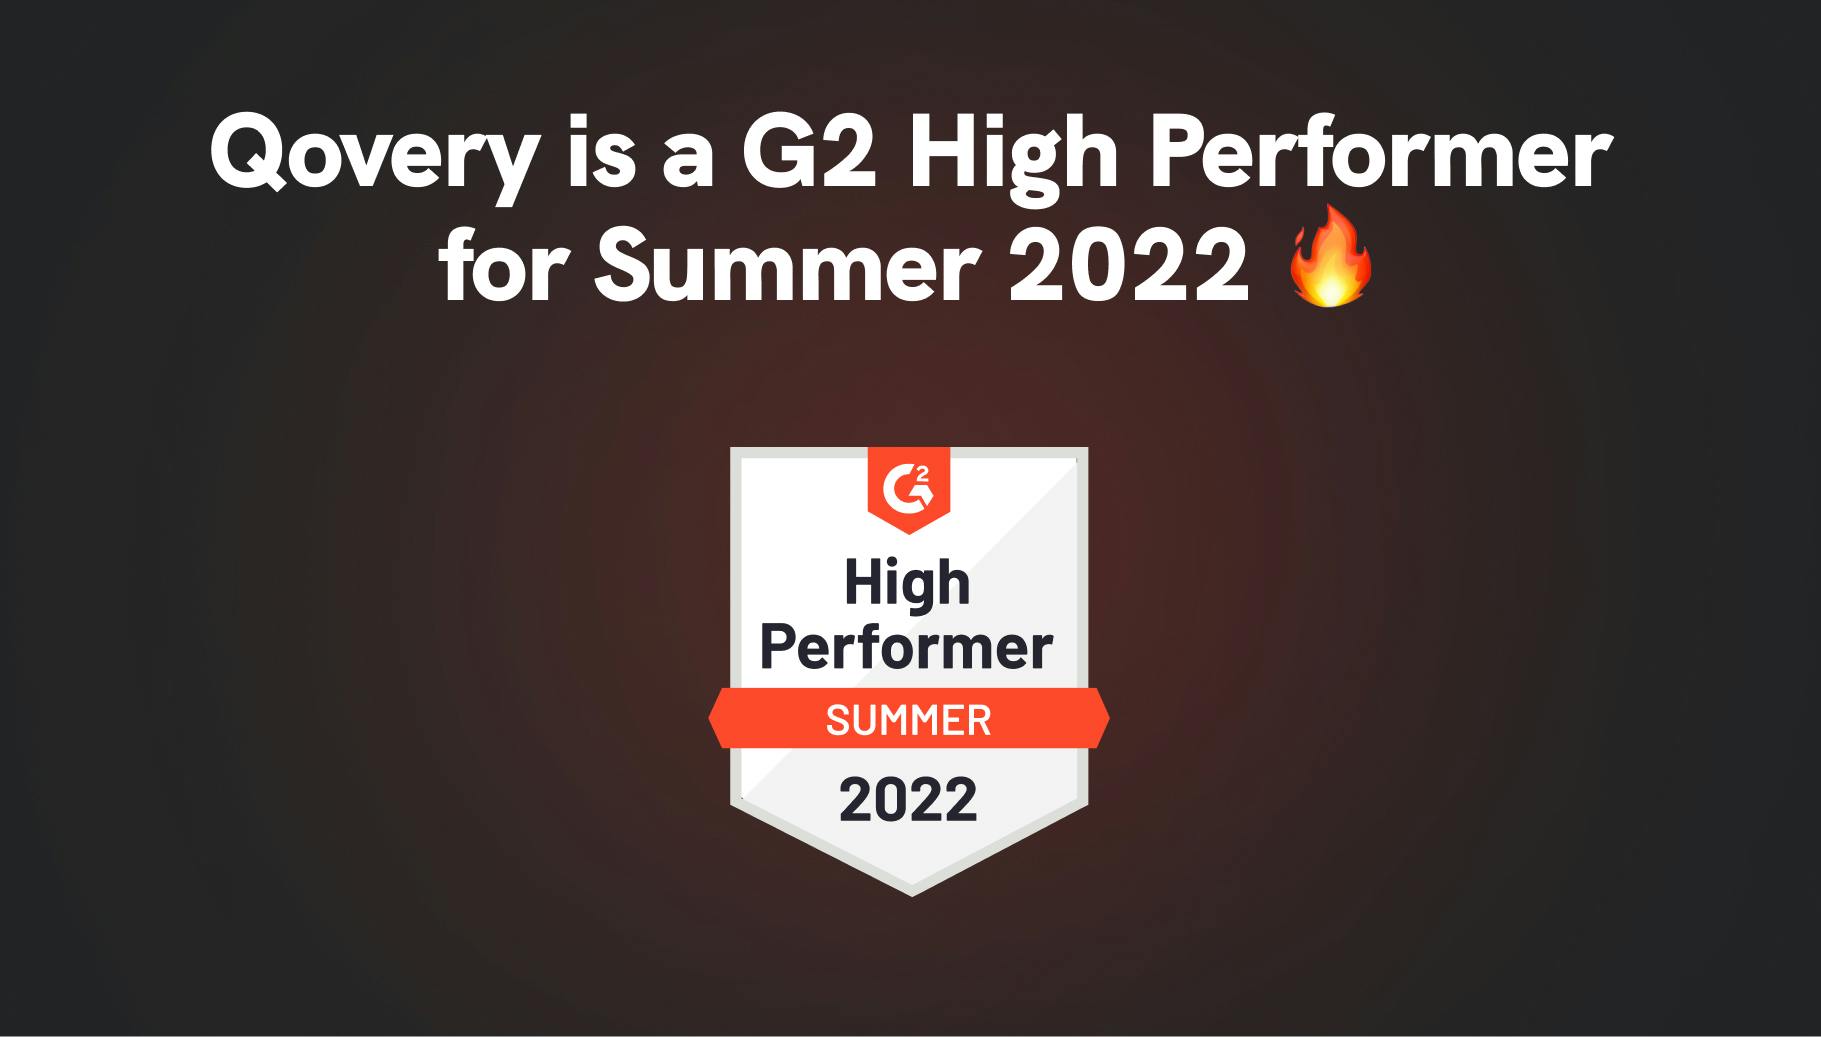 Qovery is a G2 High Performer for Summer 2022 - Qovery